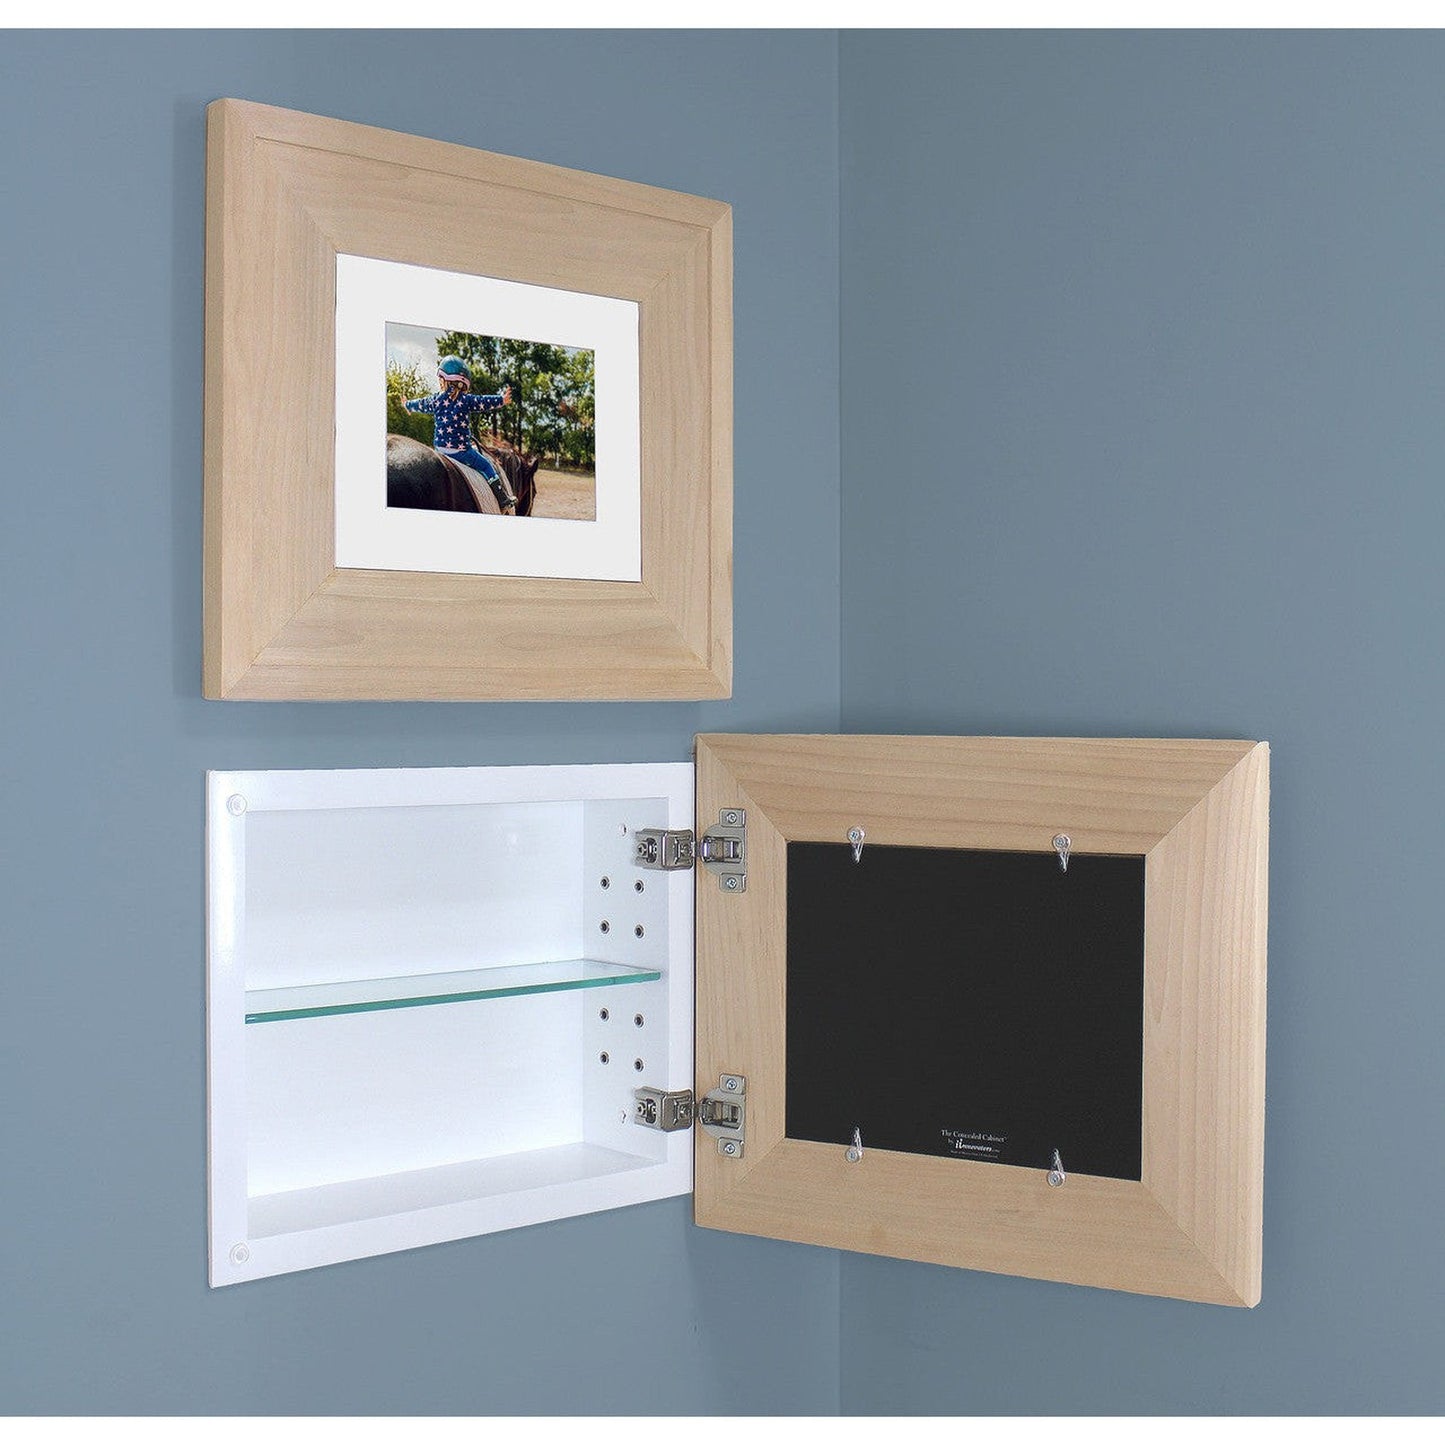 Fox Hollow Furnishings 14" x 11" Unfinished Raised Edge Compact Landscape Special 6" Depth Recessed Picture Frame Medicine Cabinet With Mirror and White Matting